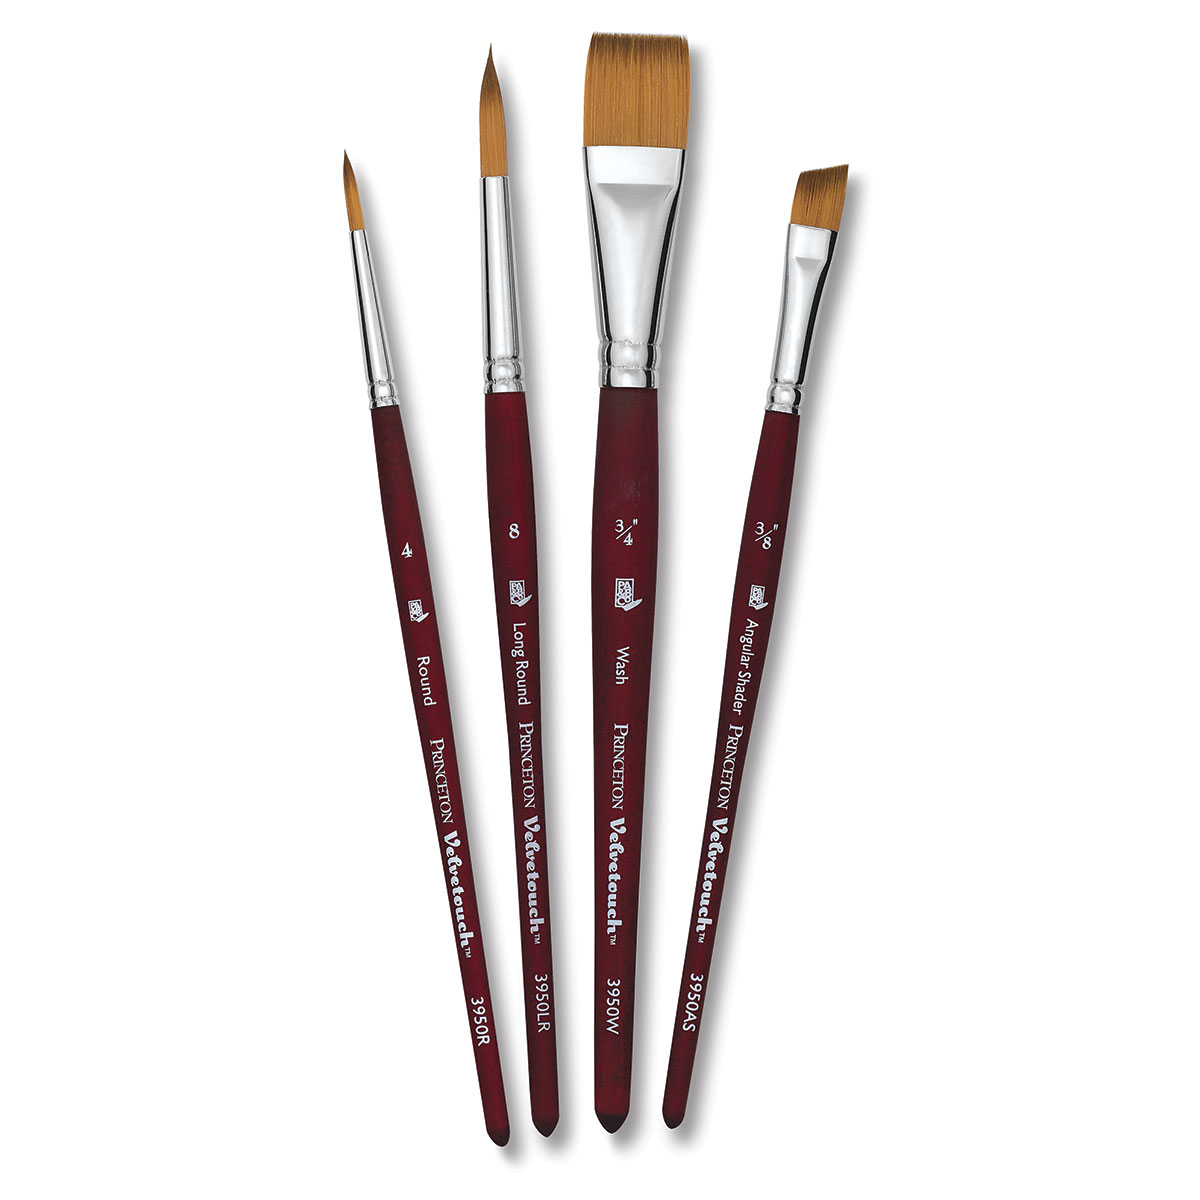 Princeton Velvetouch, Series 3950, Paint Brush For Acrylic, Oil And  Watercolor, Set Of 4 - Paint Brushes - AliExpress